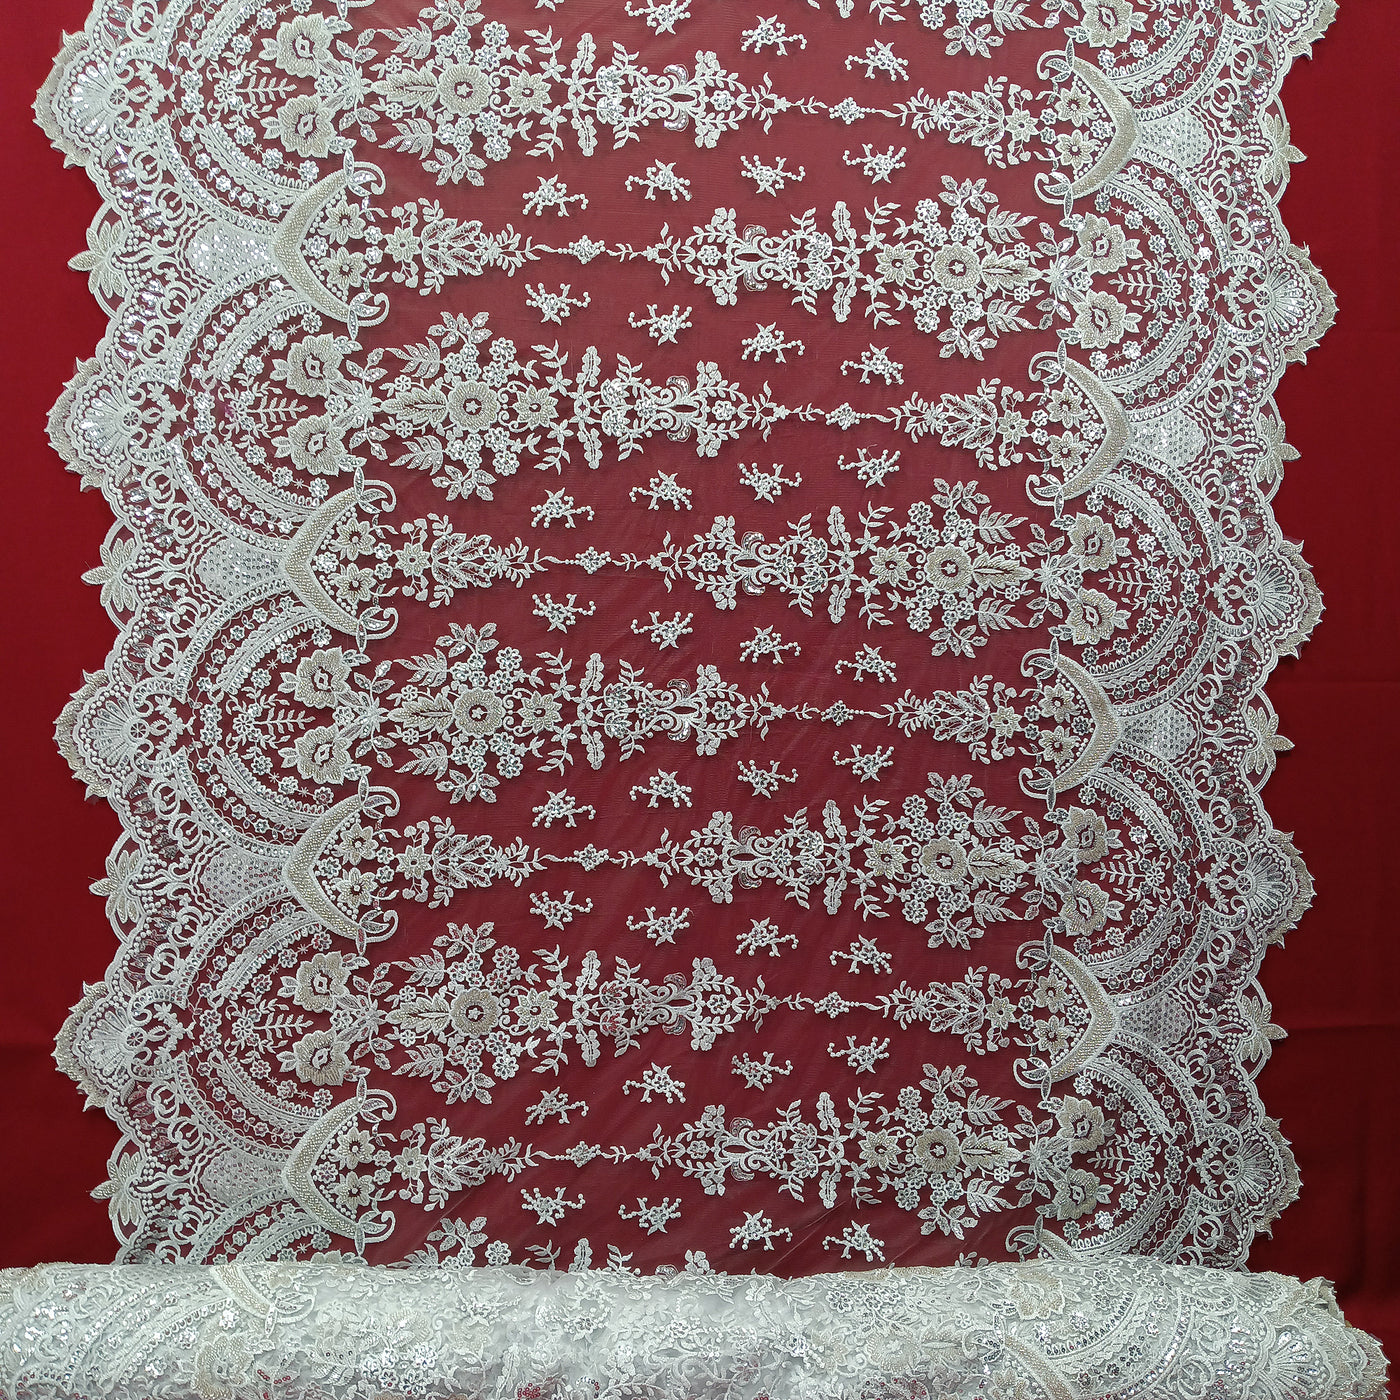 Beaded Lace Fabric Embroidered on 100% Polyester Net Mesh | Lace USA - 73029W-HB